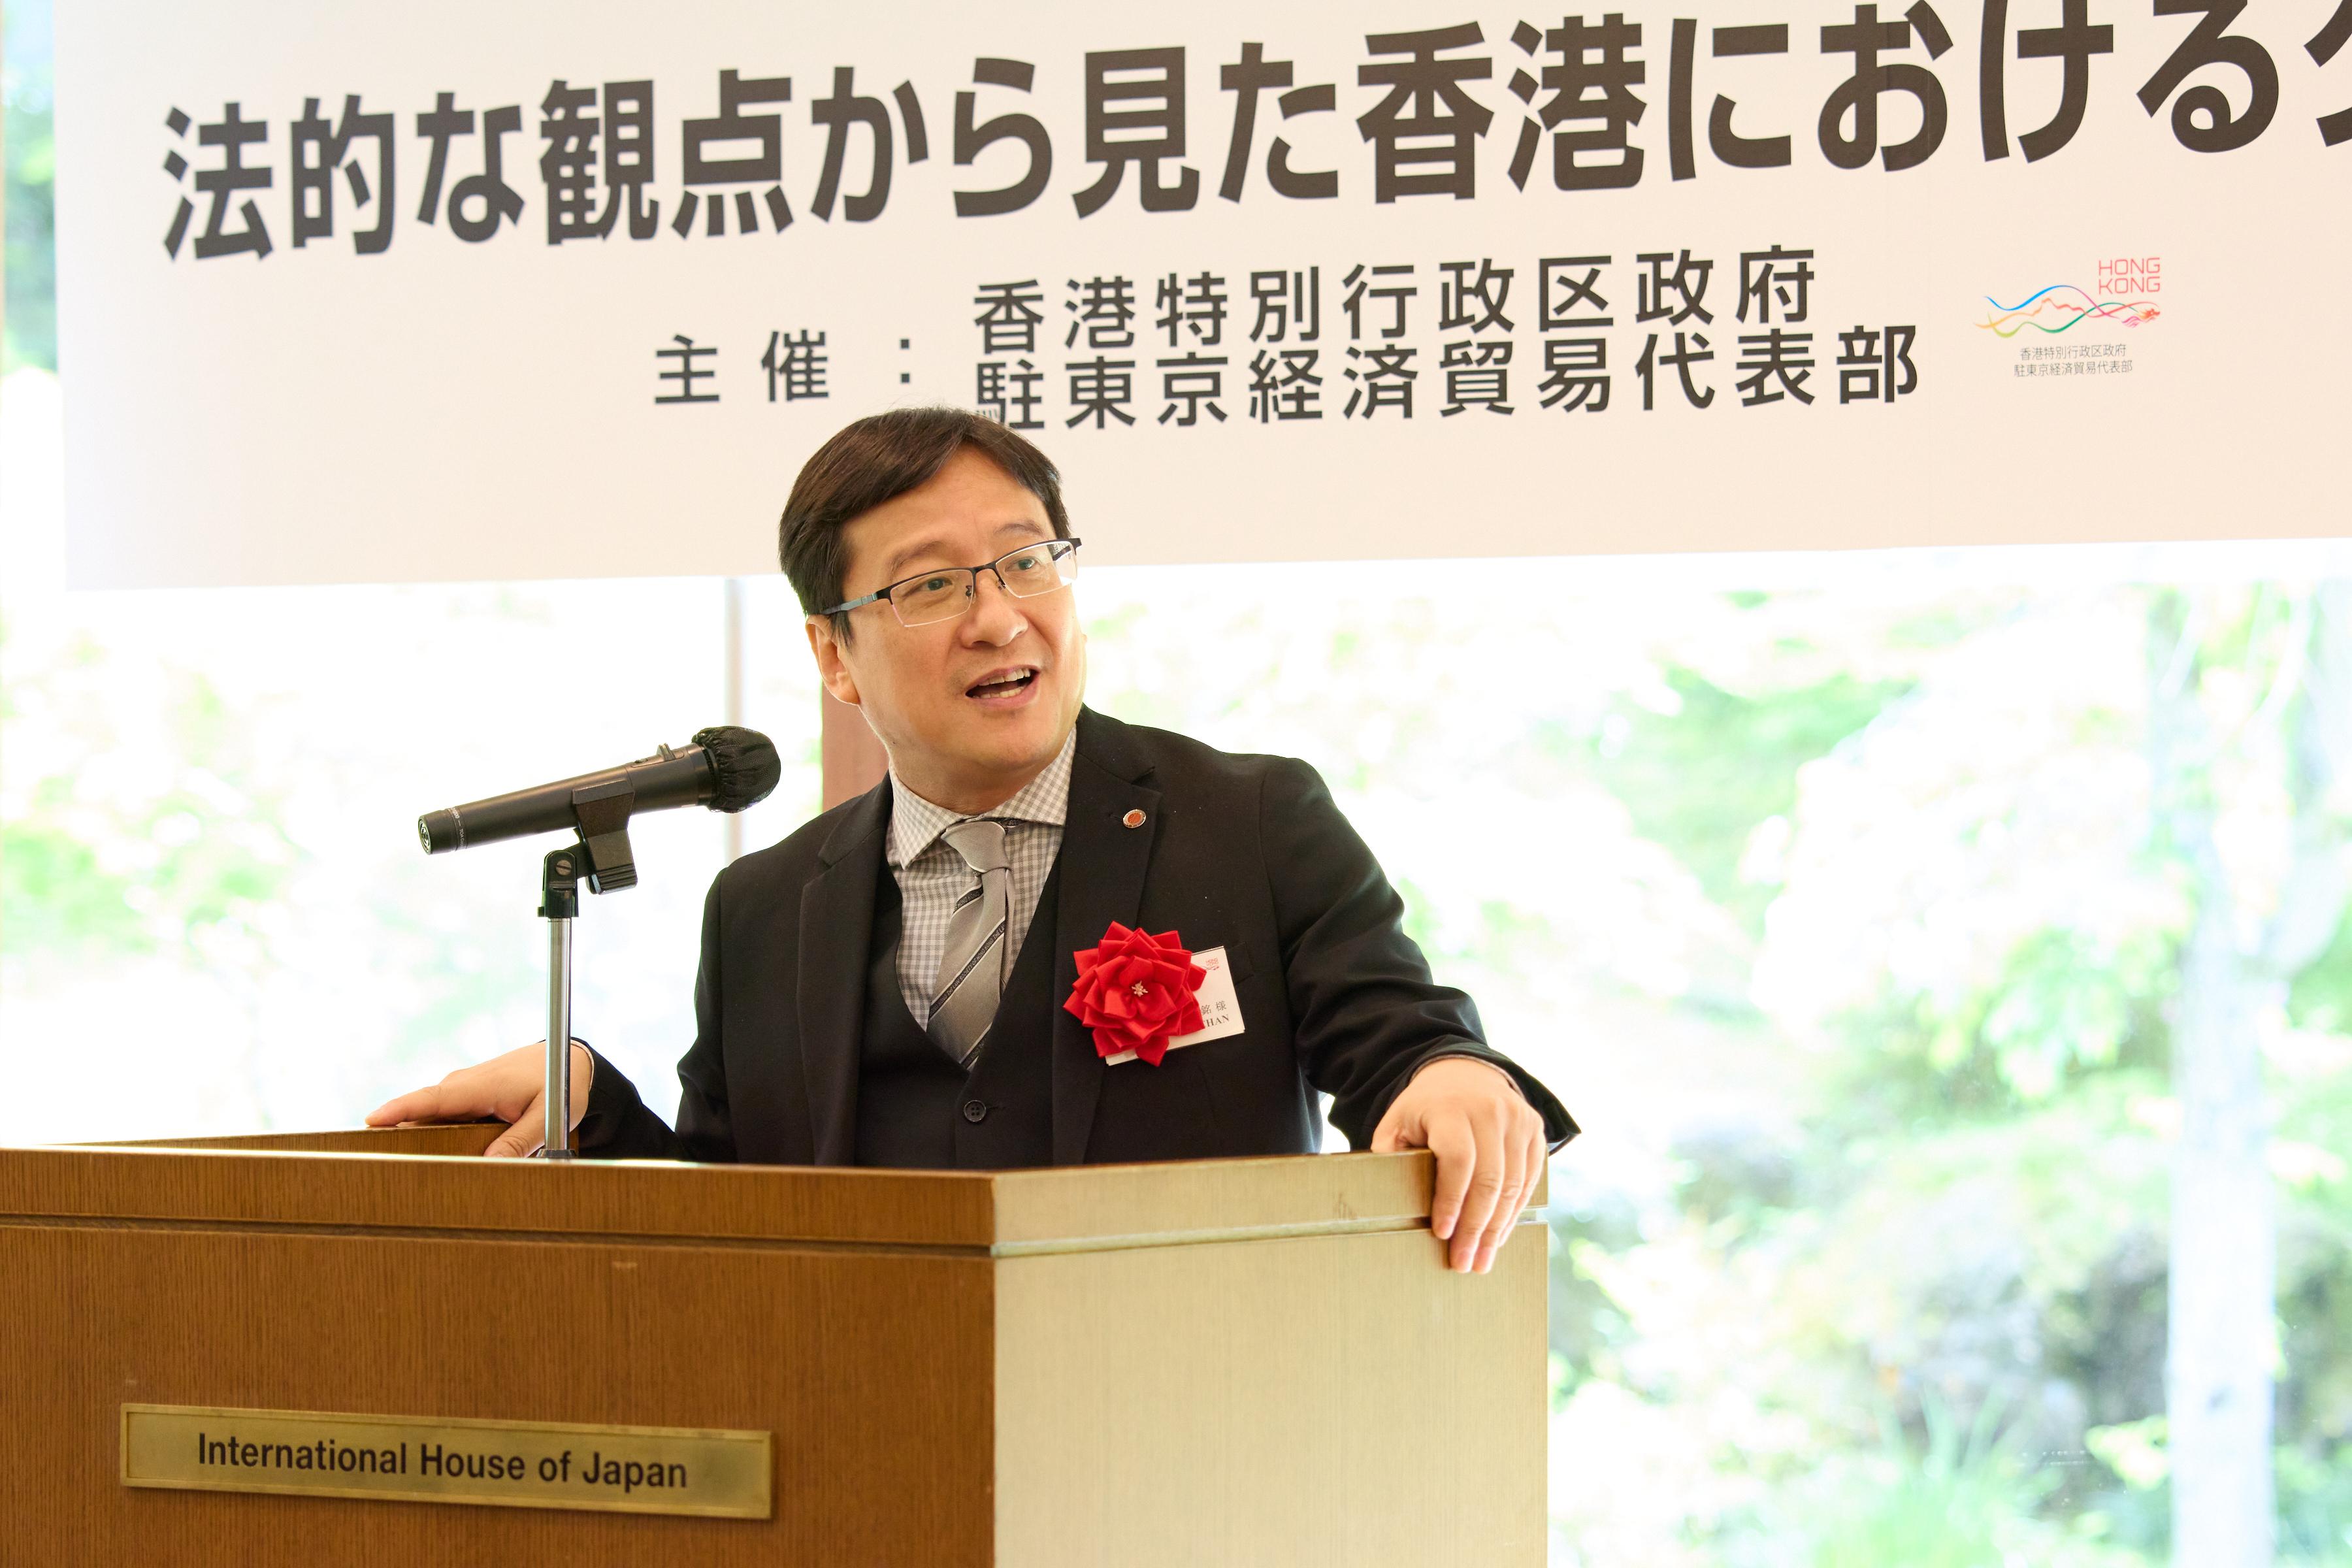 The President of the Law Society of Hong Kong, Mr C M Chan, delivers a welcome remark at the networking luncheon jointly held by the Hong Kong Economic and Trade Office (Tokyo) and the Law Society of Hong Kong in Tokyo, Japan, today (April 26).

